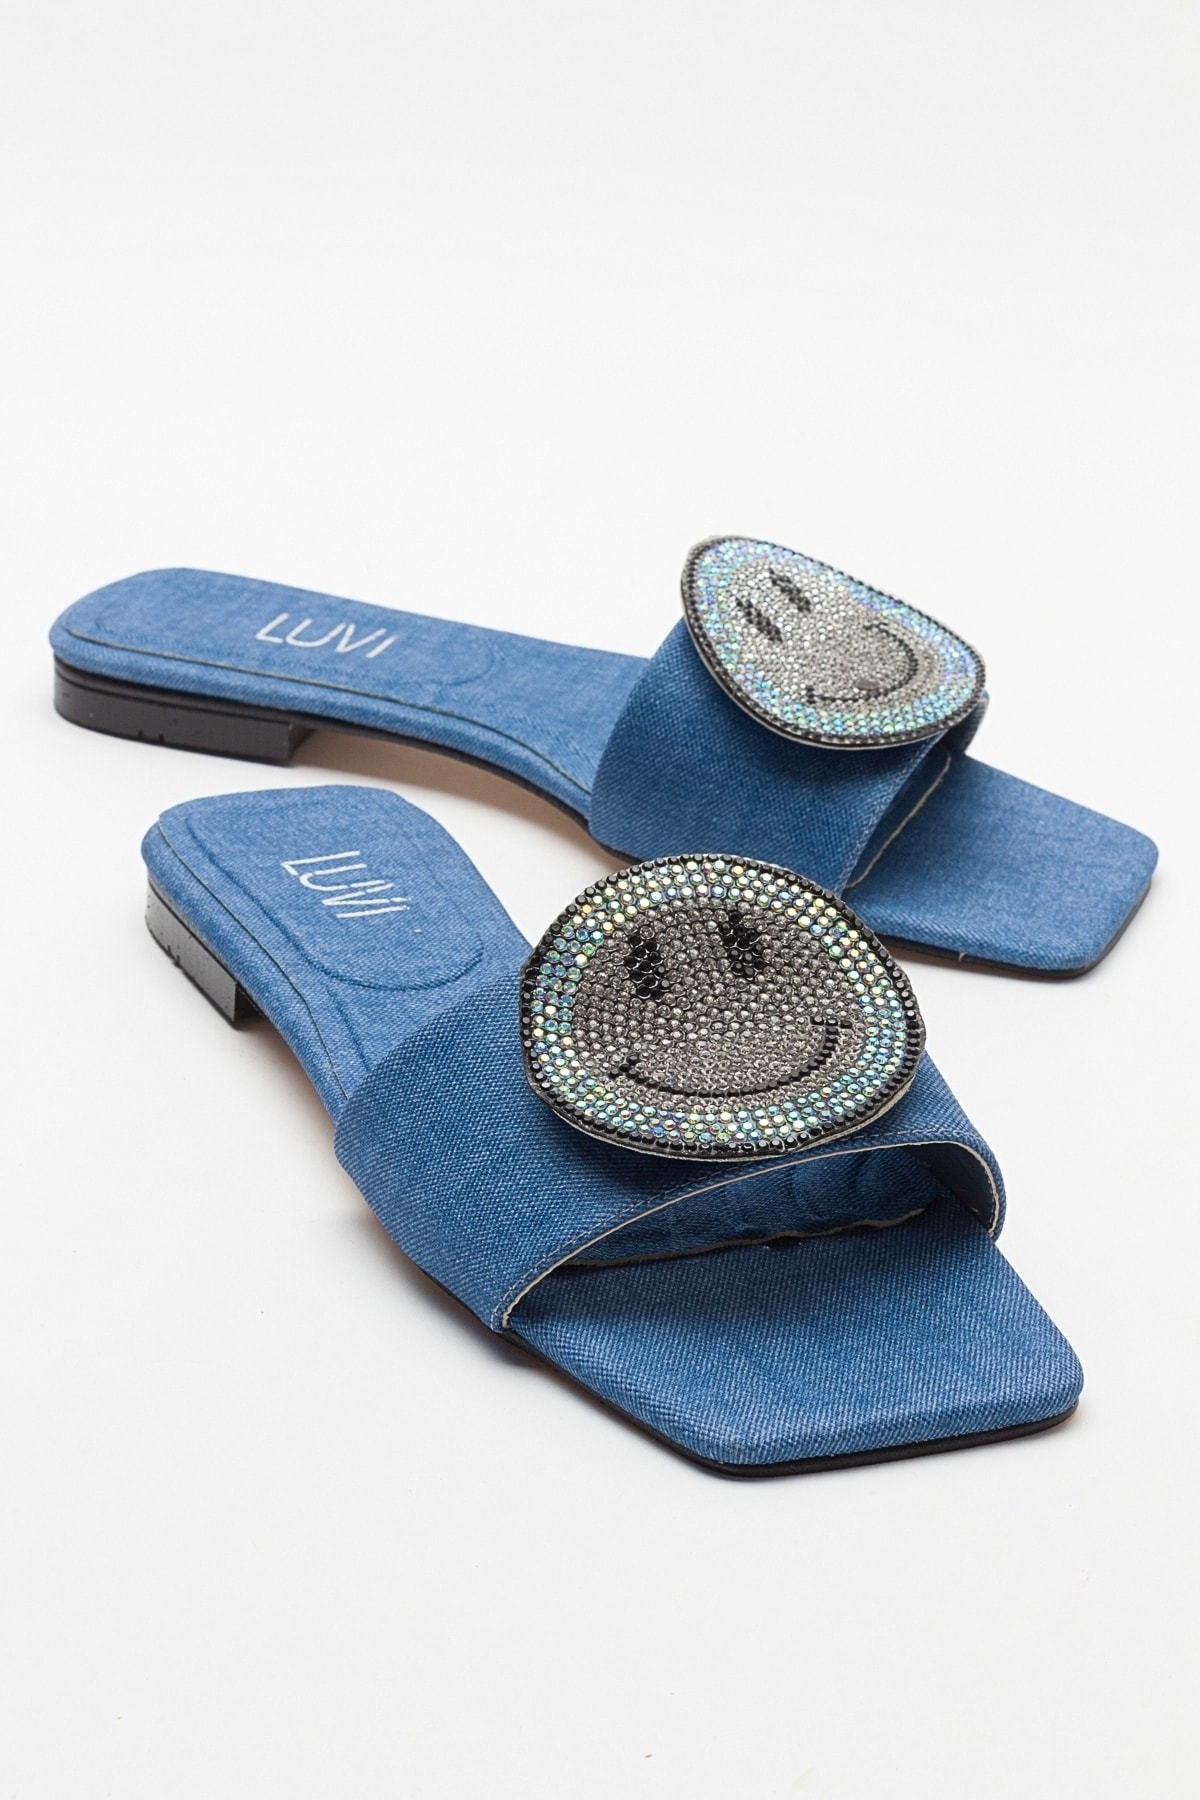 Levně LuviShoes YAVN Jeans Women's Slippers with Blue Stones